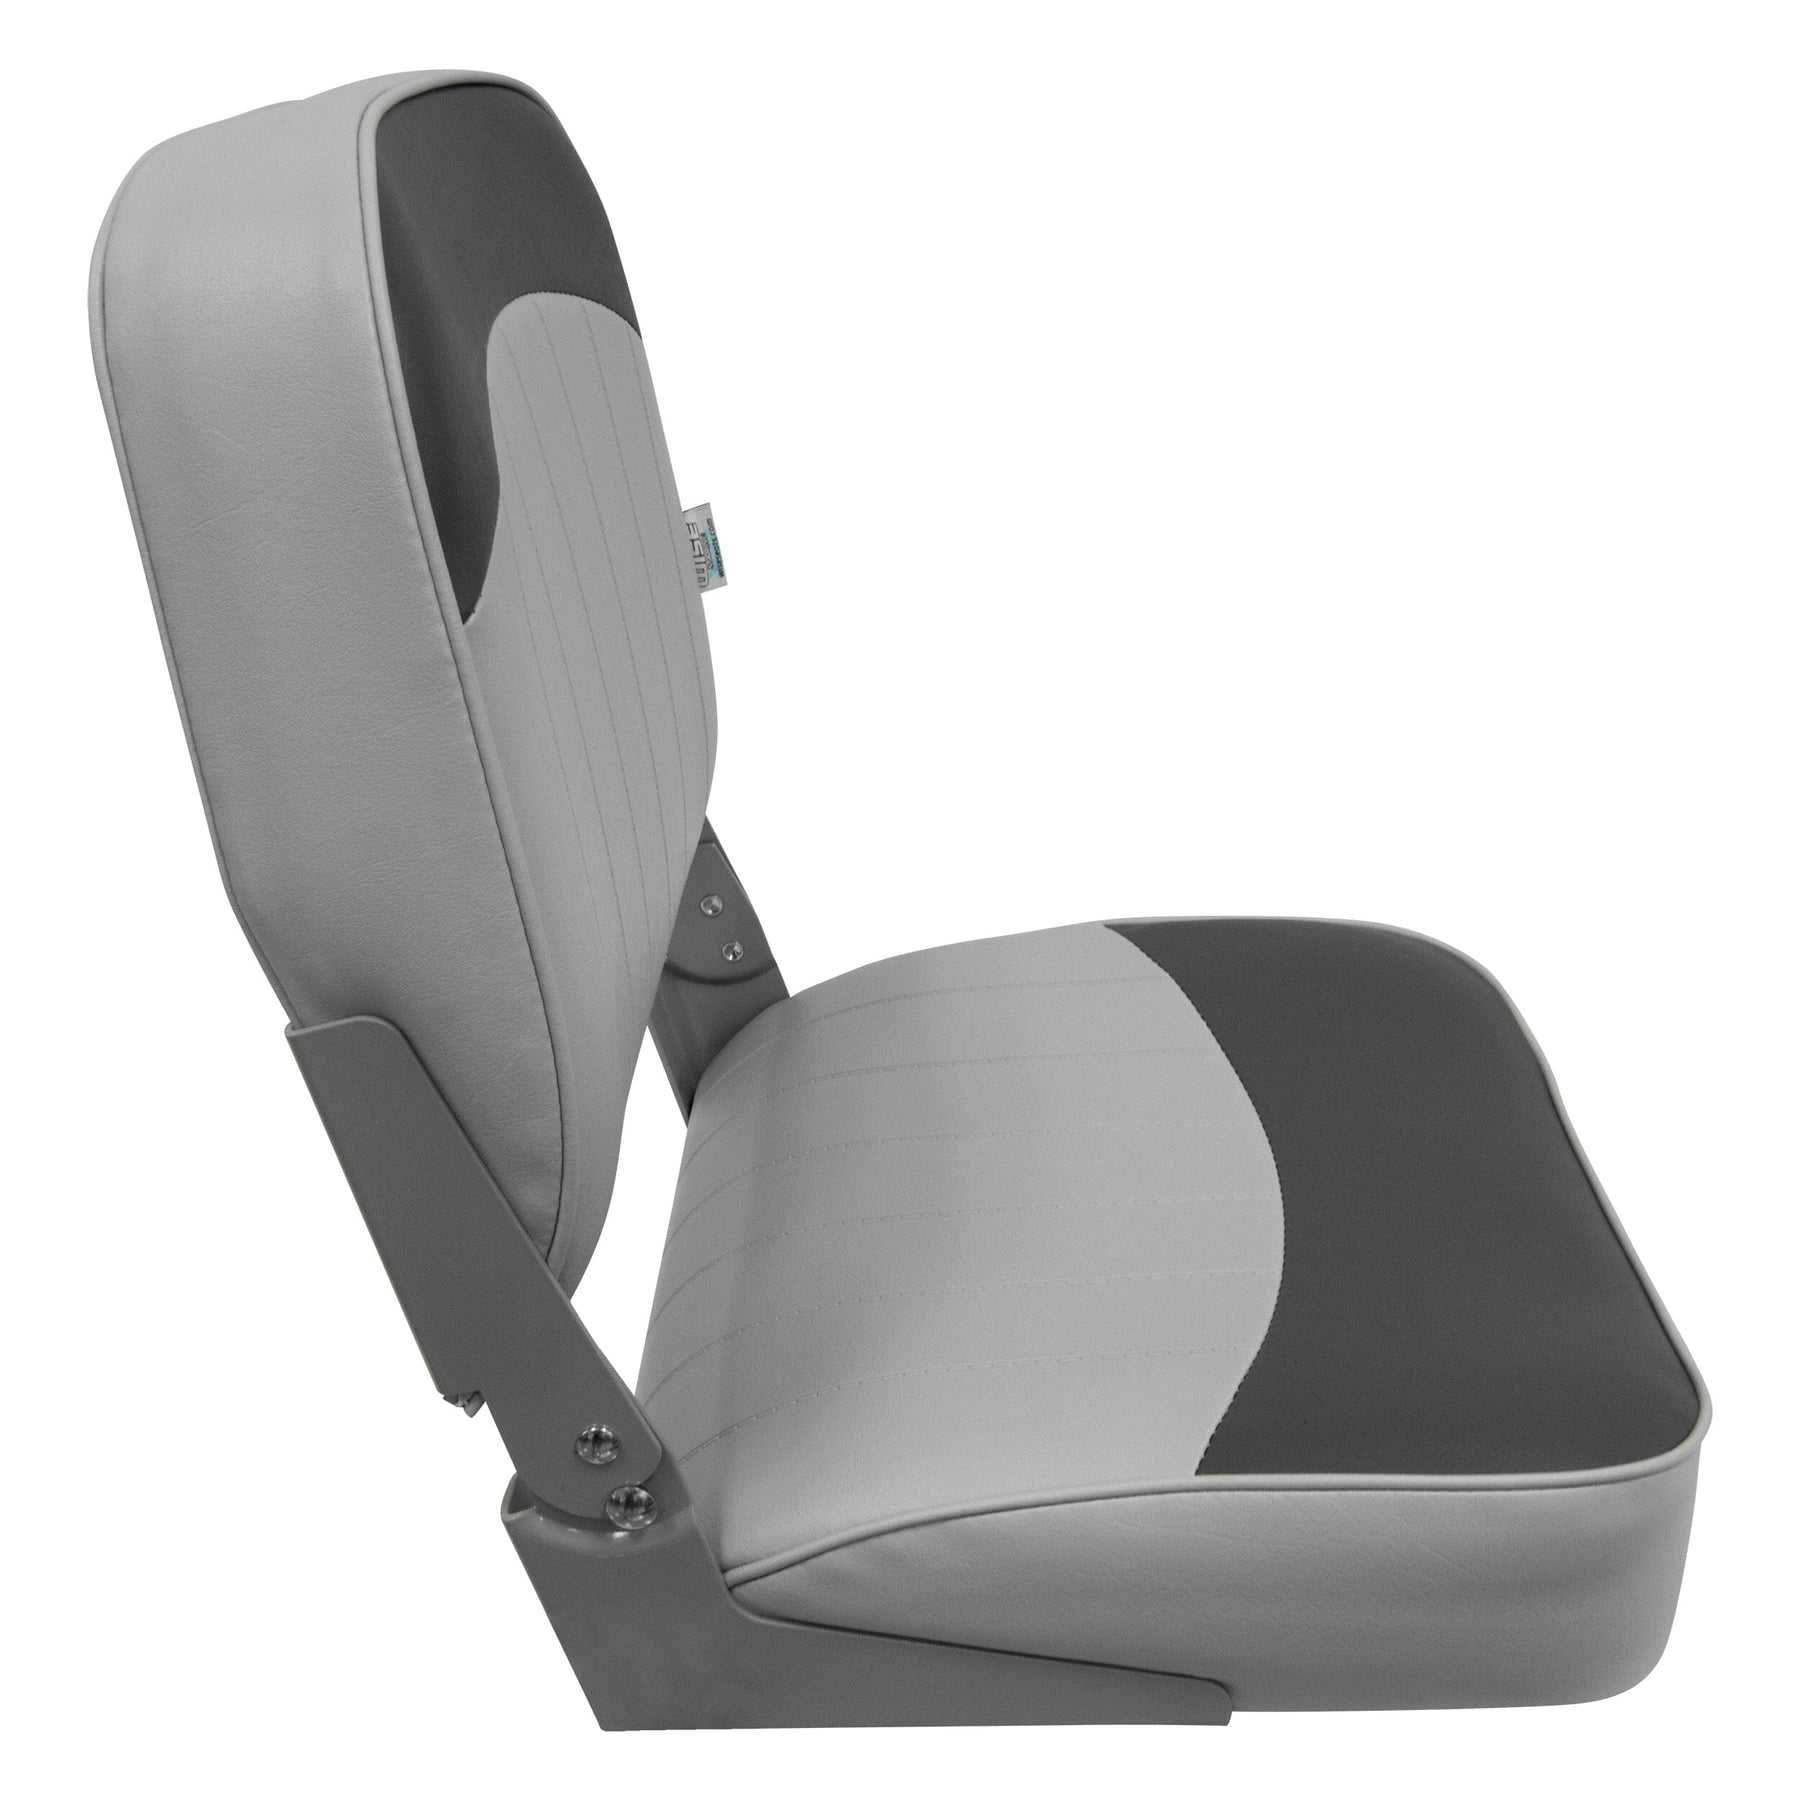 Wise Seating Low Back Boat Seat, Grey/Red